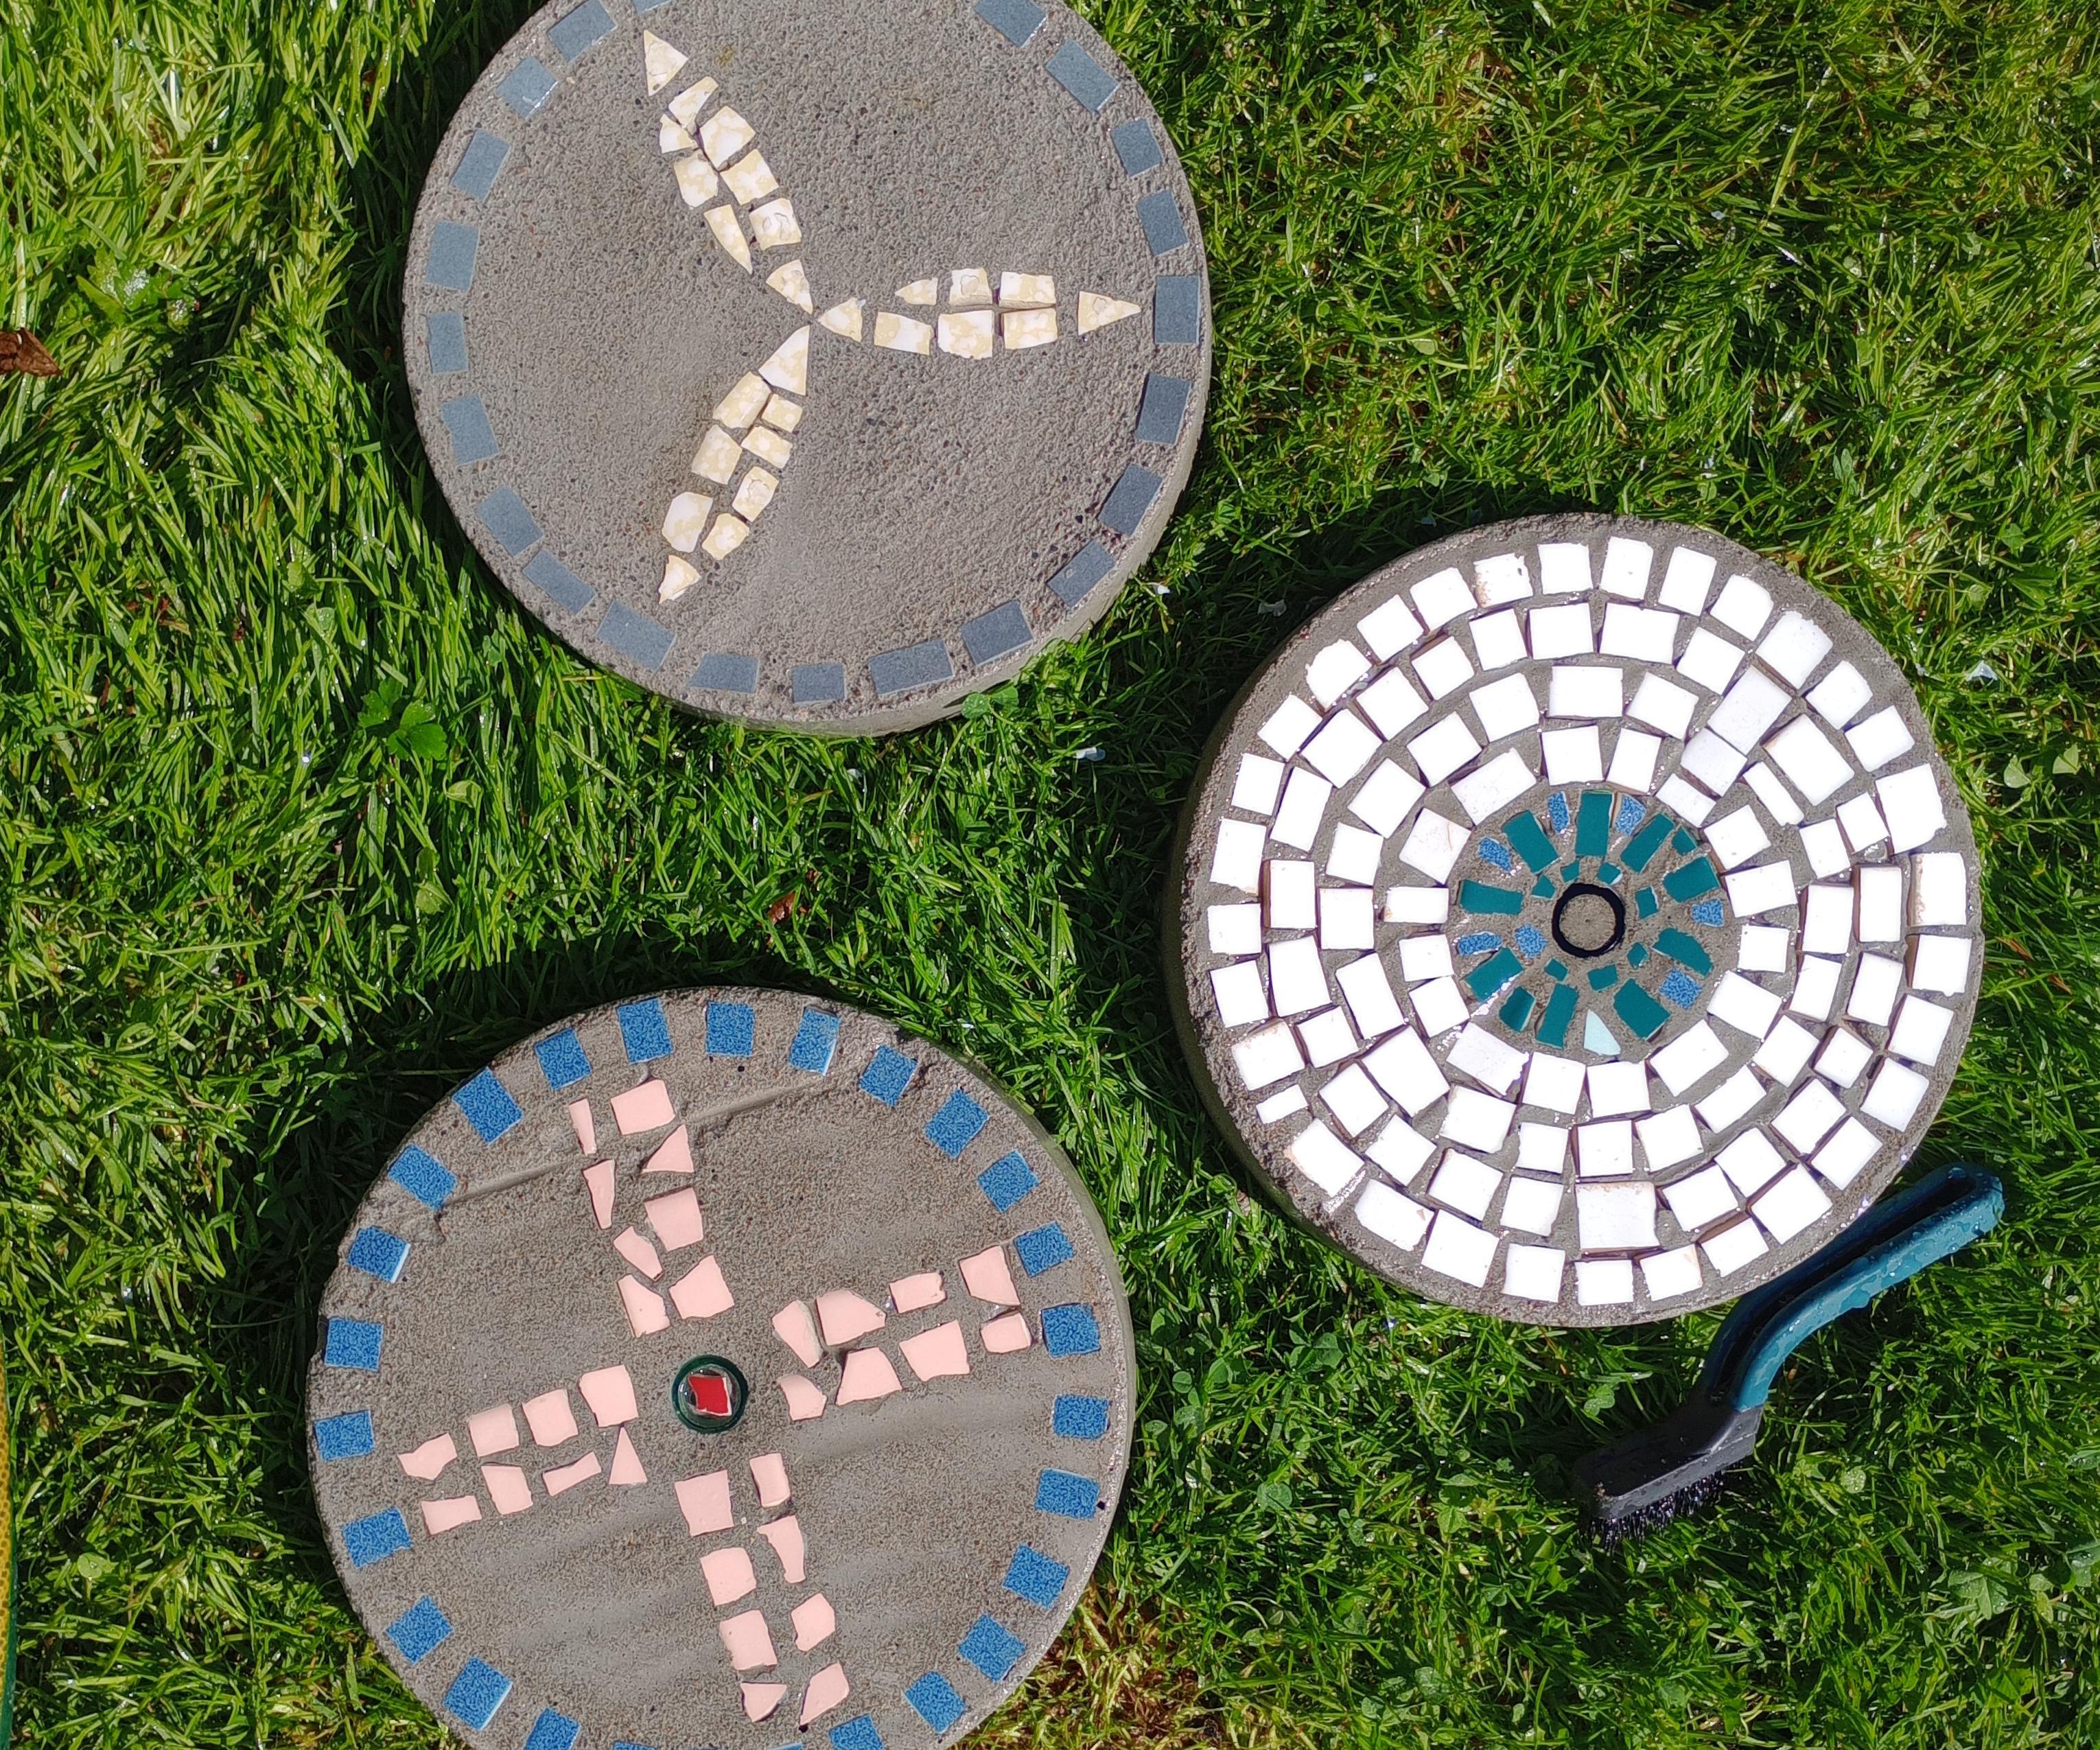 Concrete Stepping Stones With Tile Mosaic